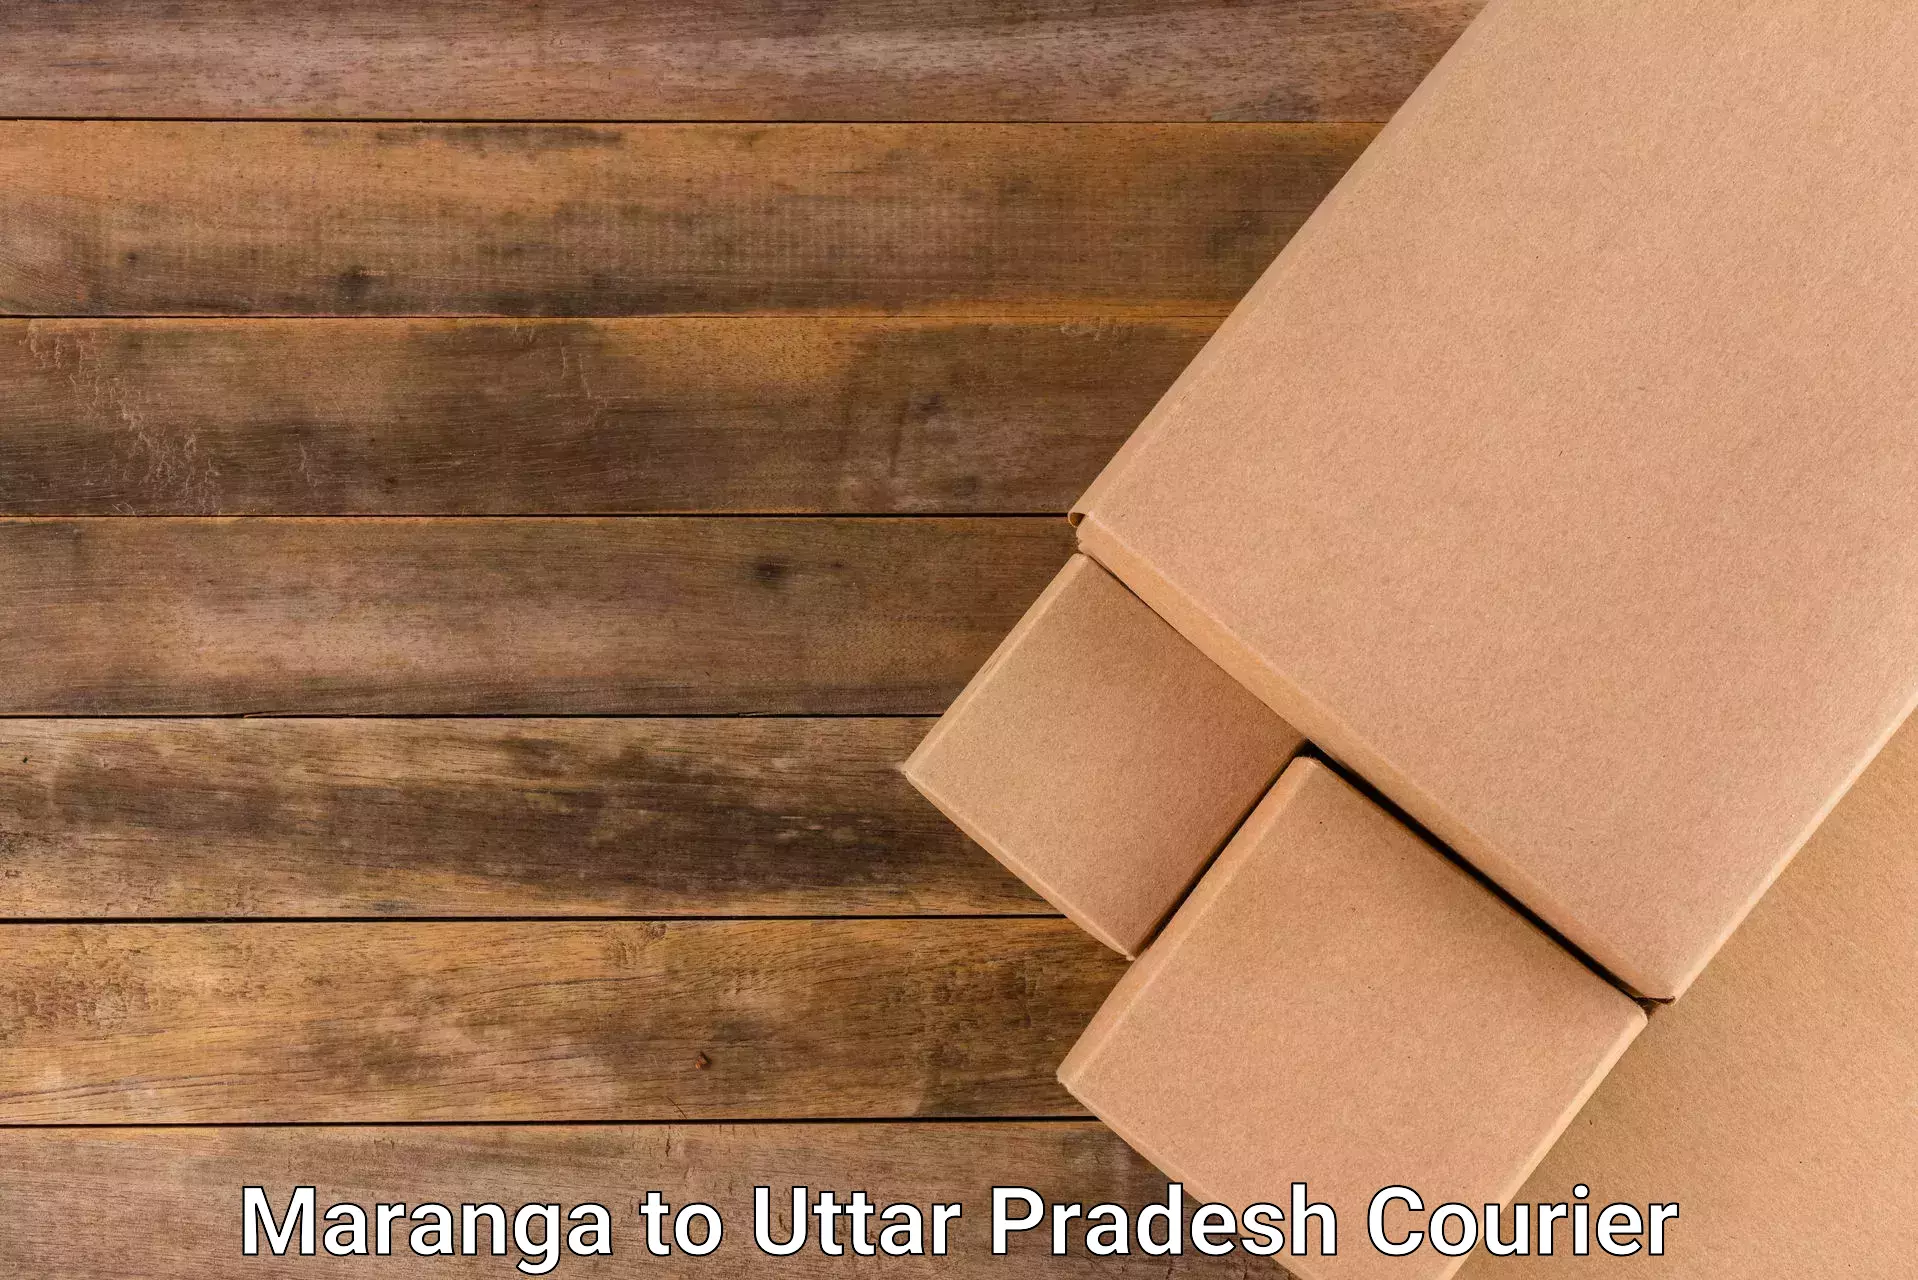 Express courier capabilities in Maranga to Lucknow